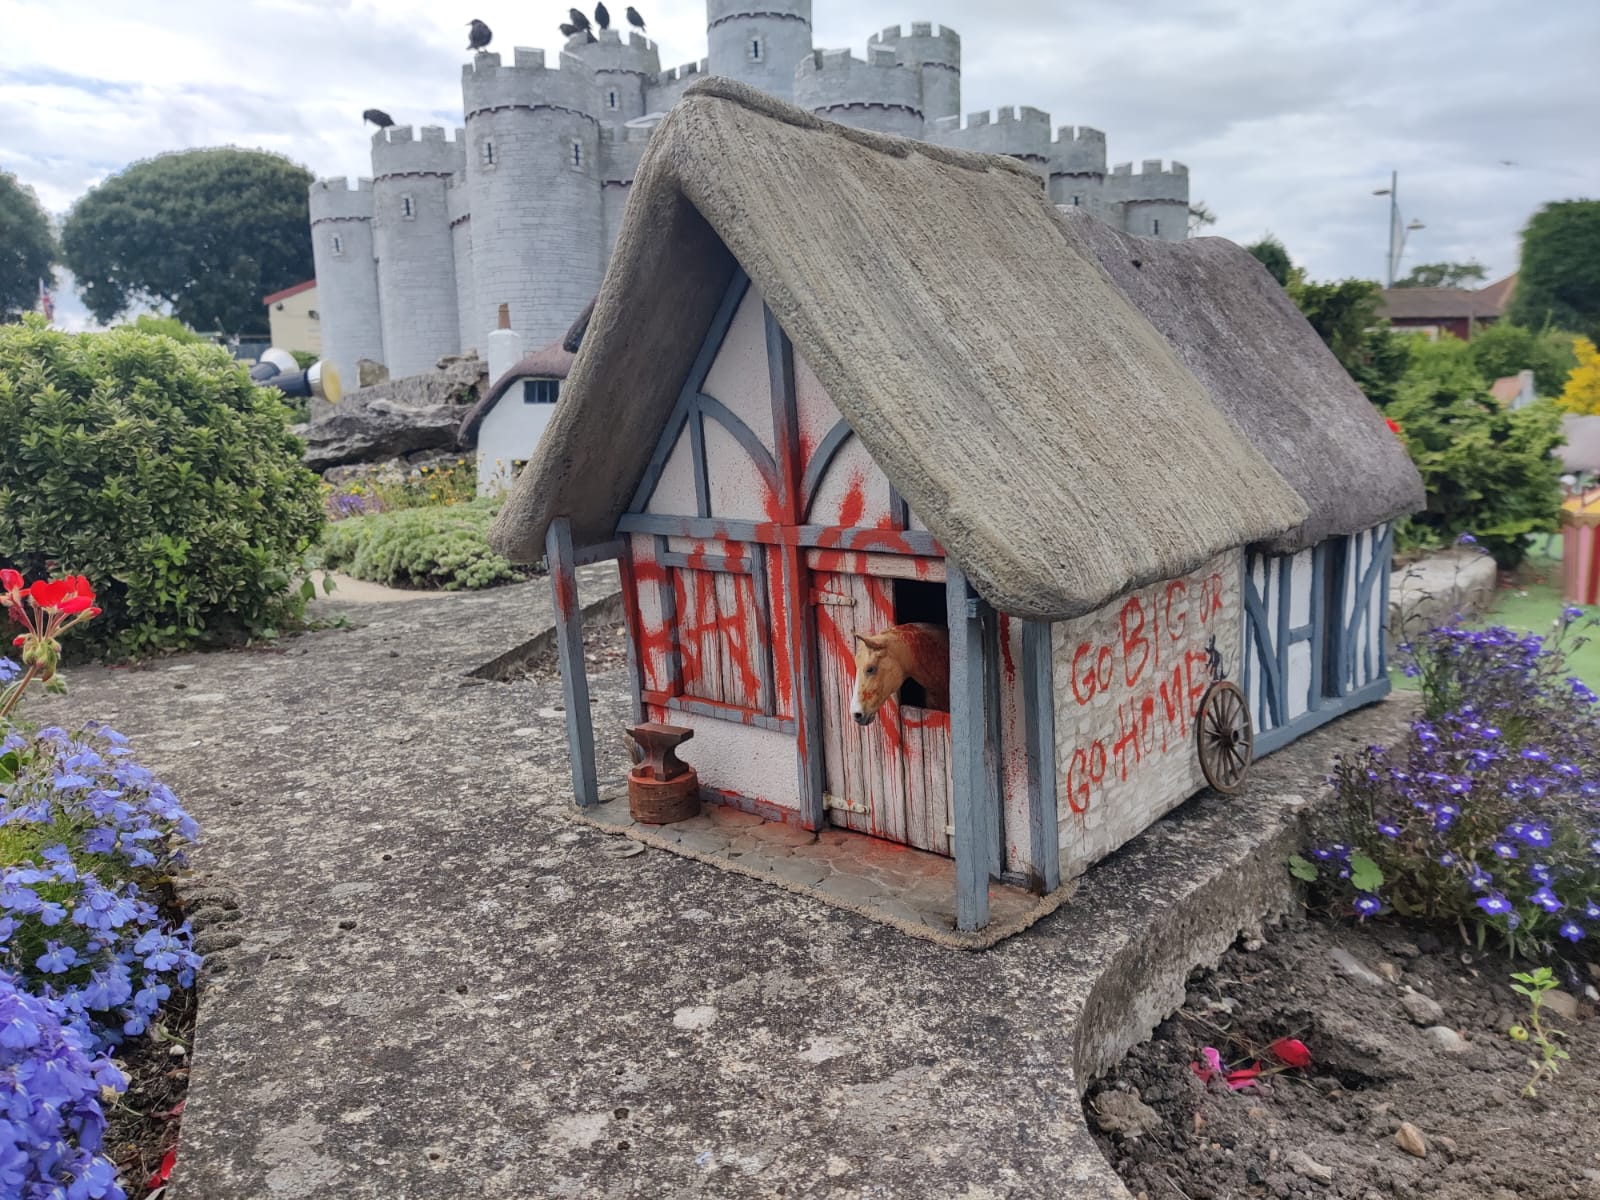 A Banksy artwork left at a model village in Norfolk is to go up for sale at North East Auction House